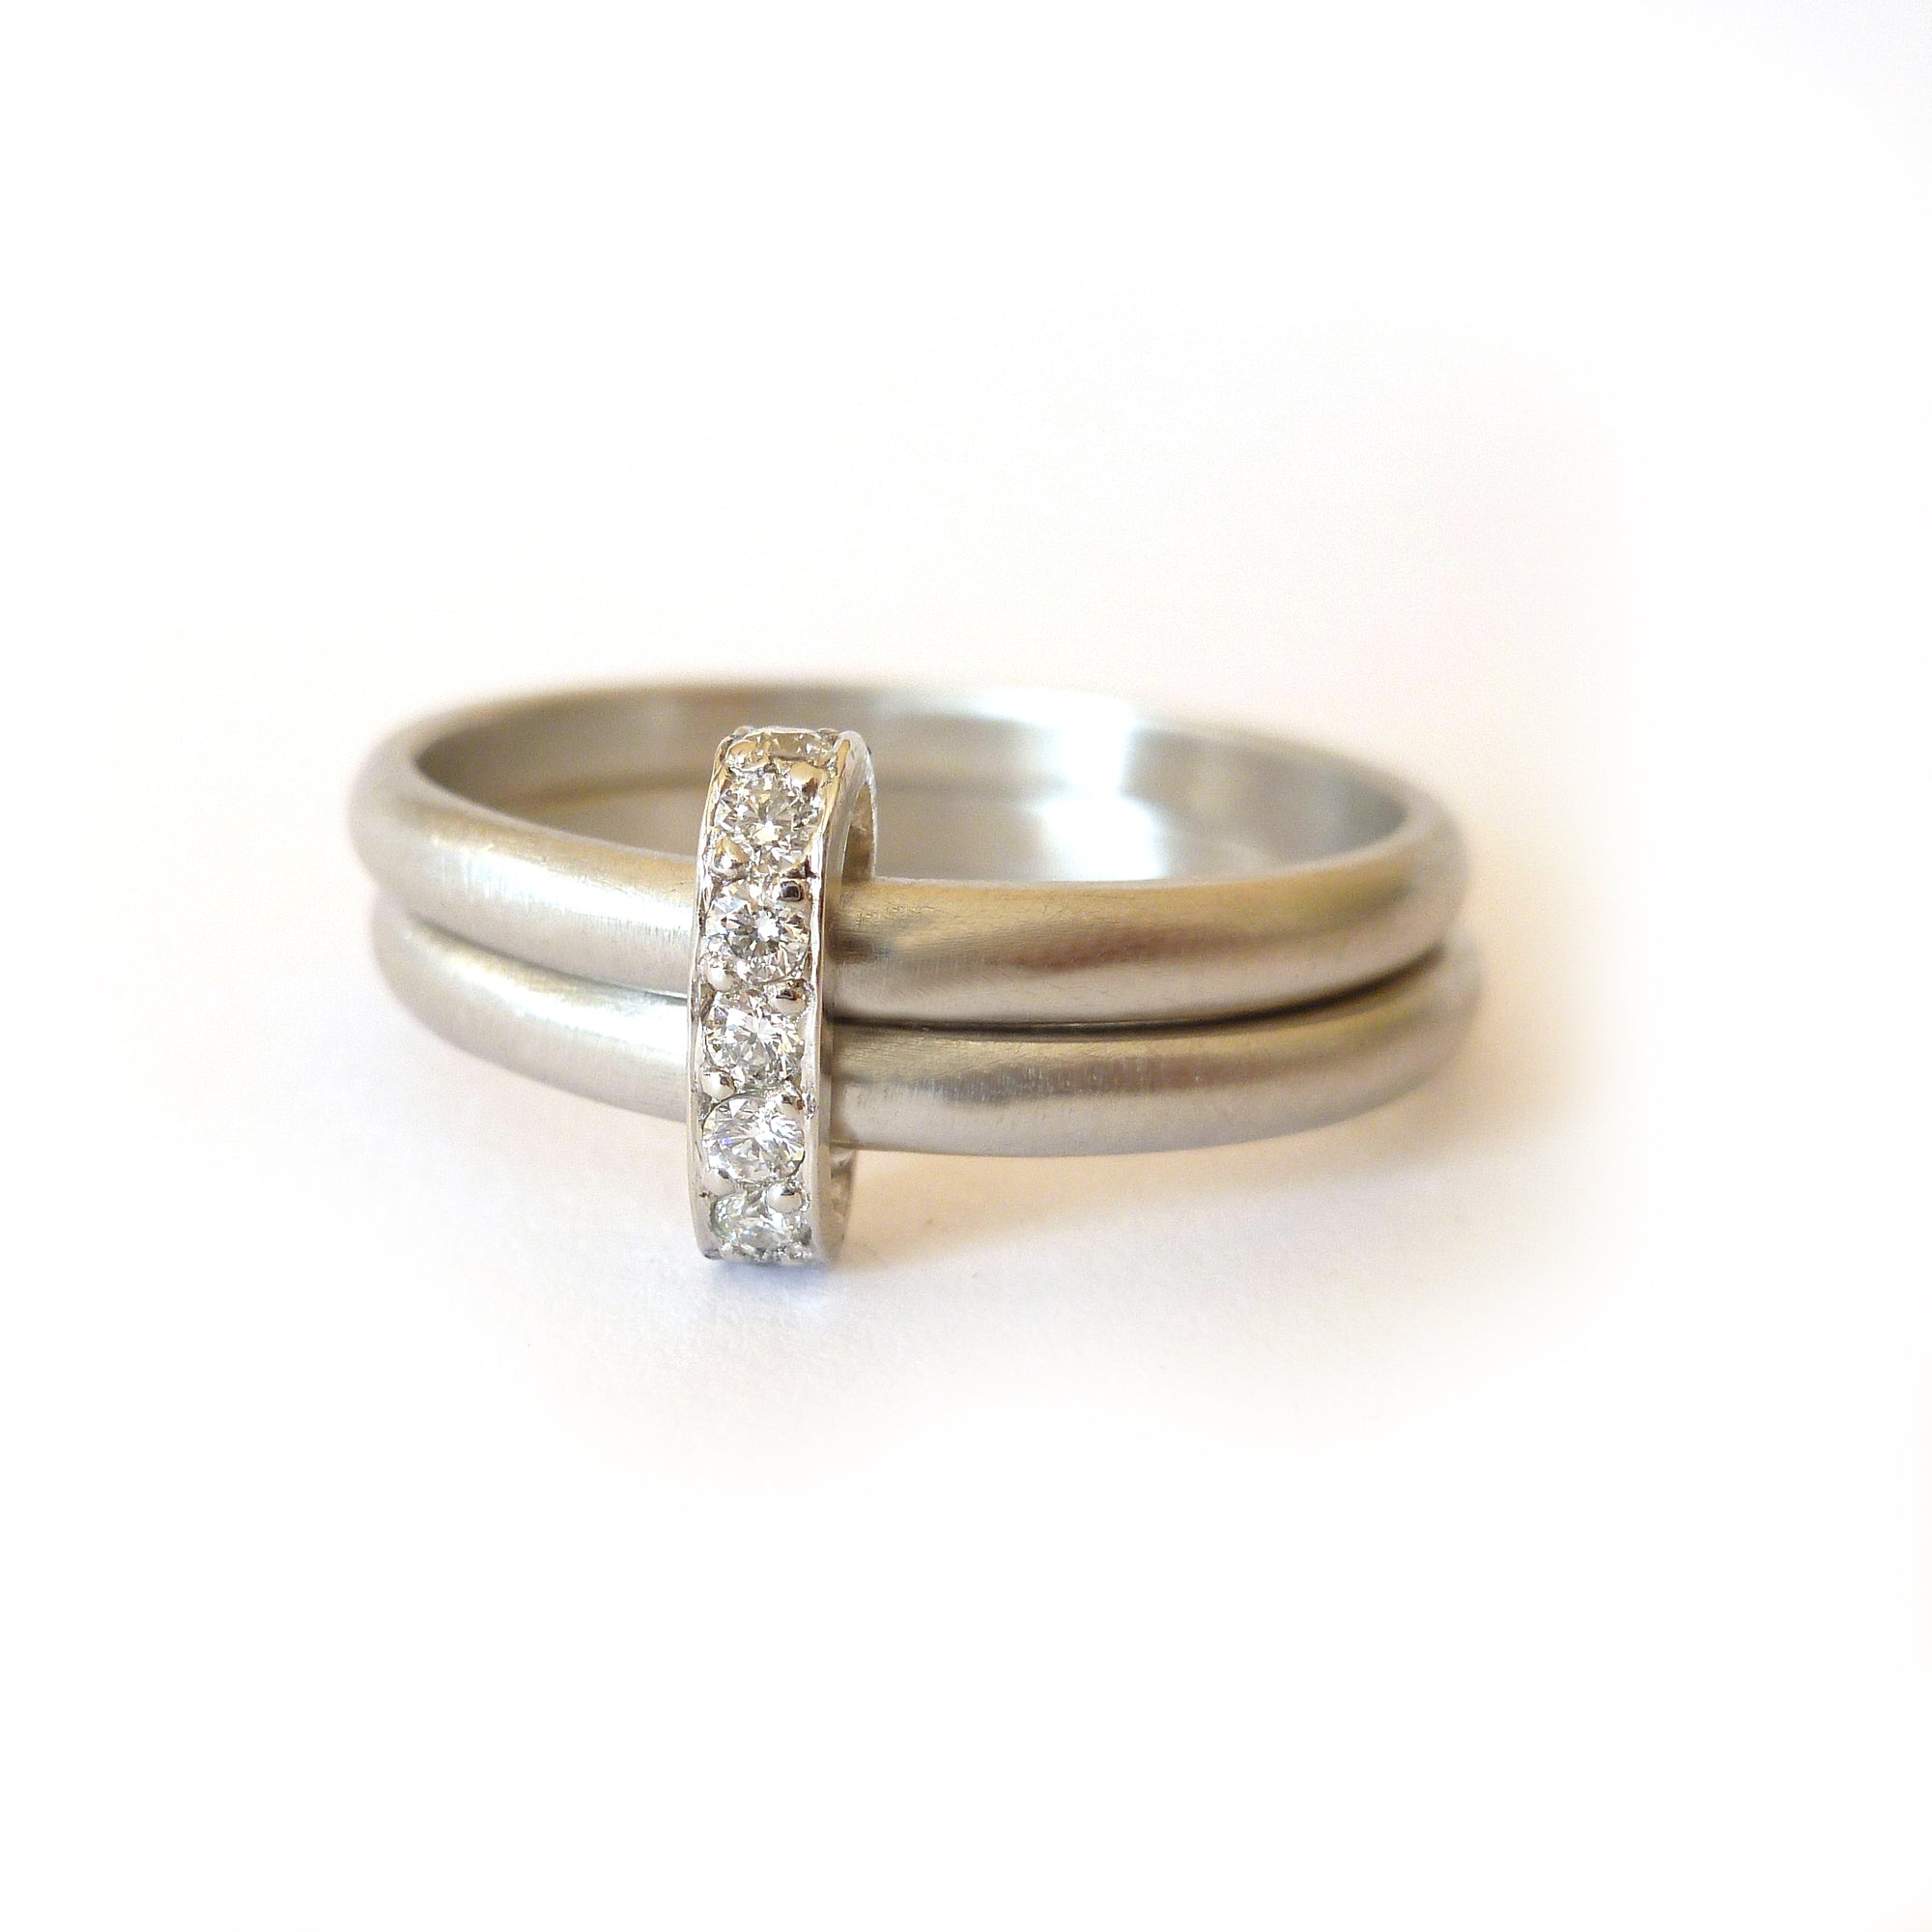 Multi band ring or interlocking ring, sometimes called double band ring too.